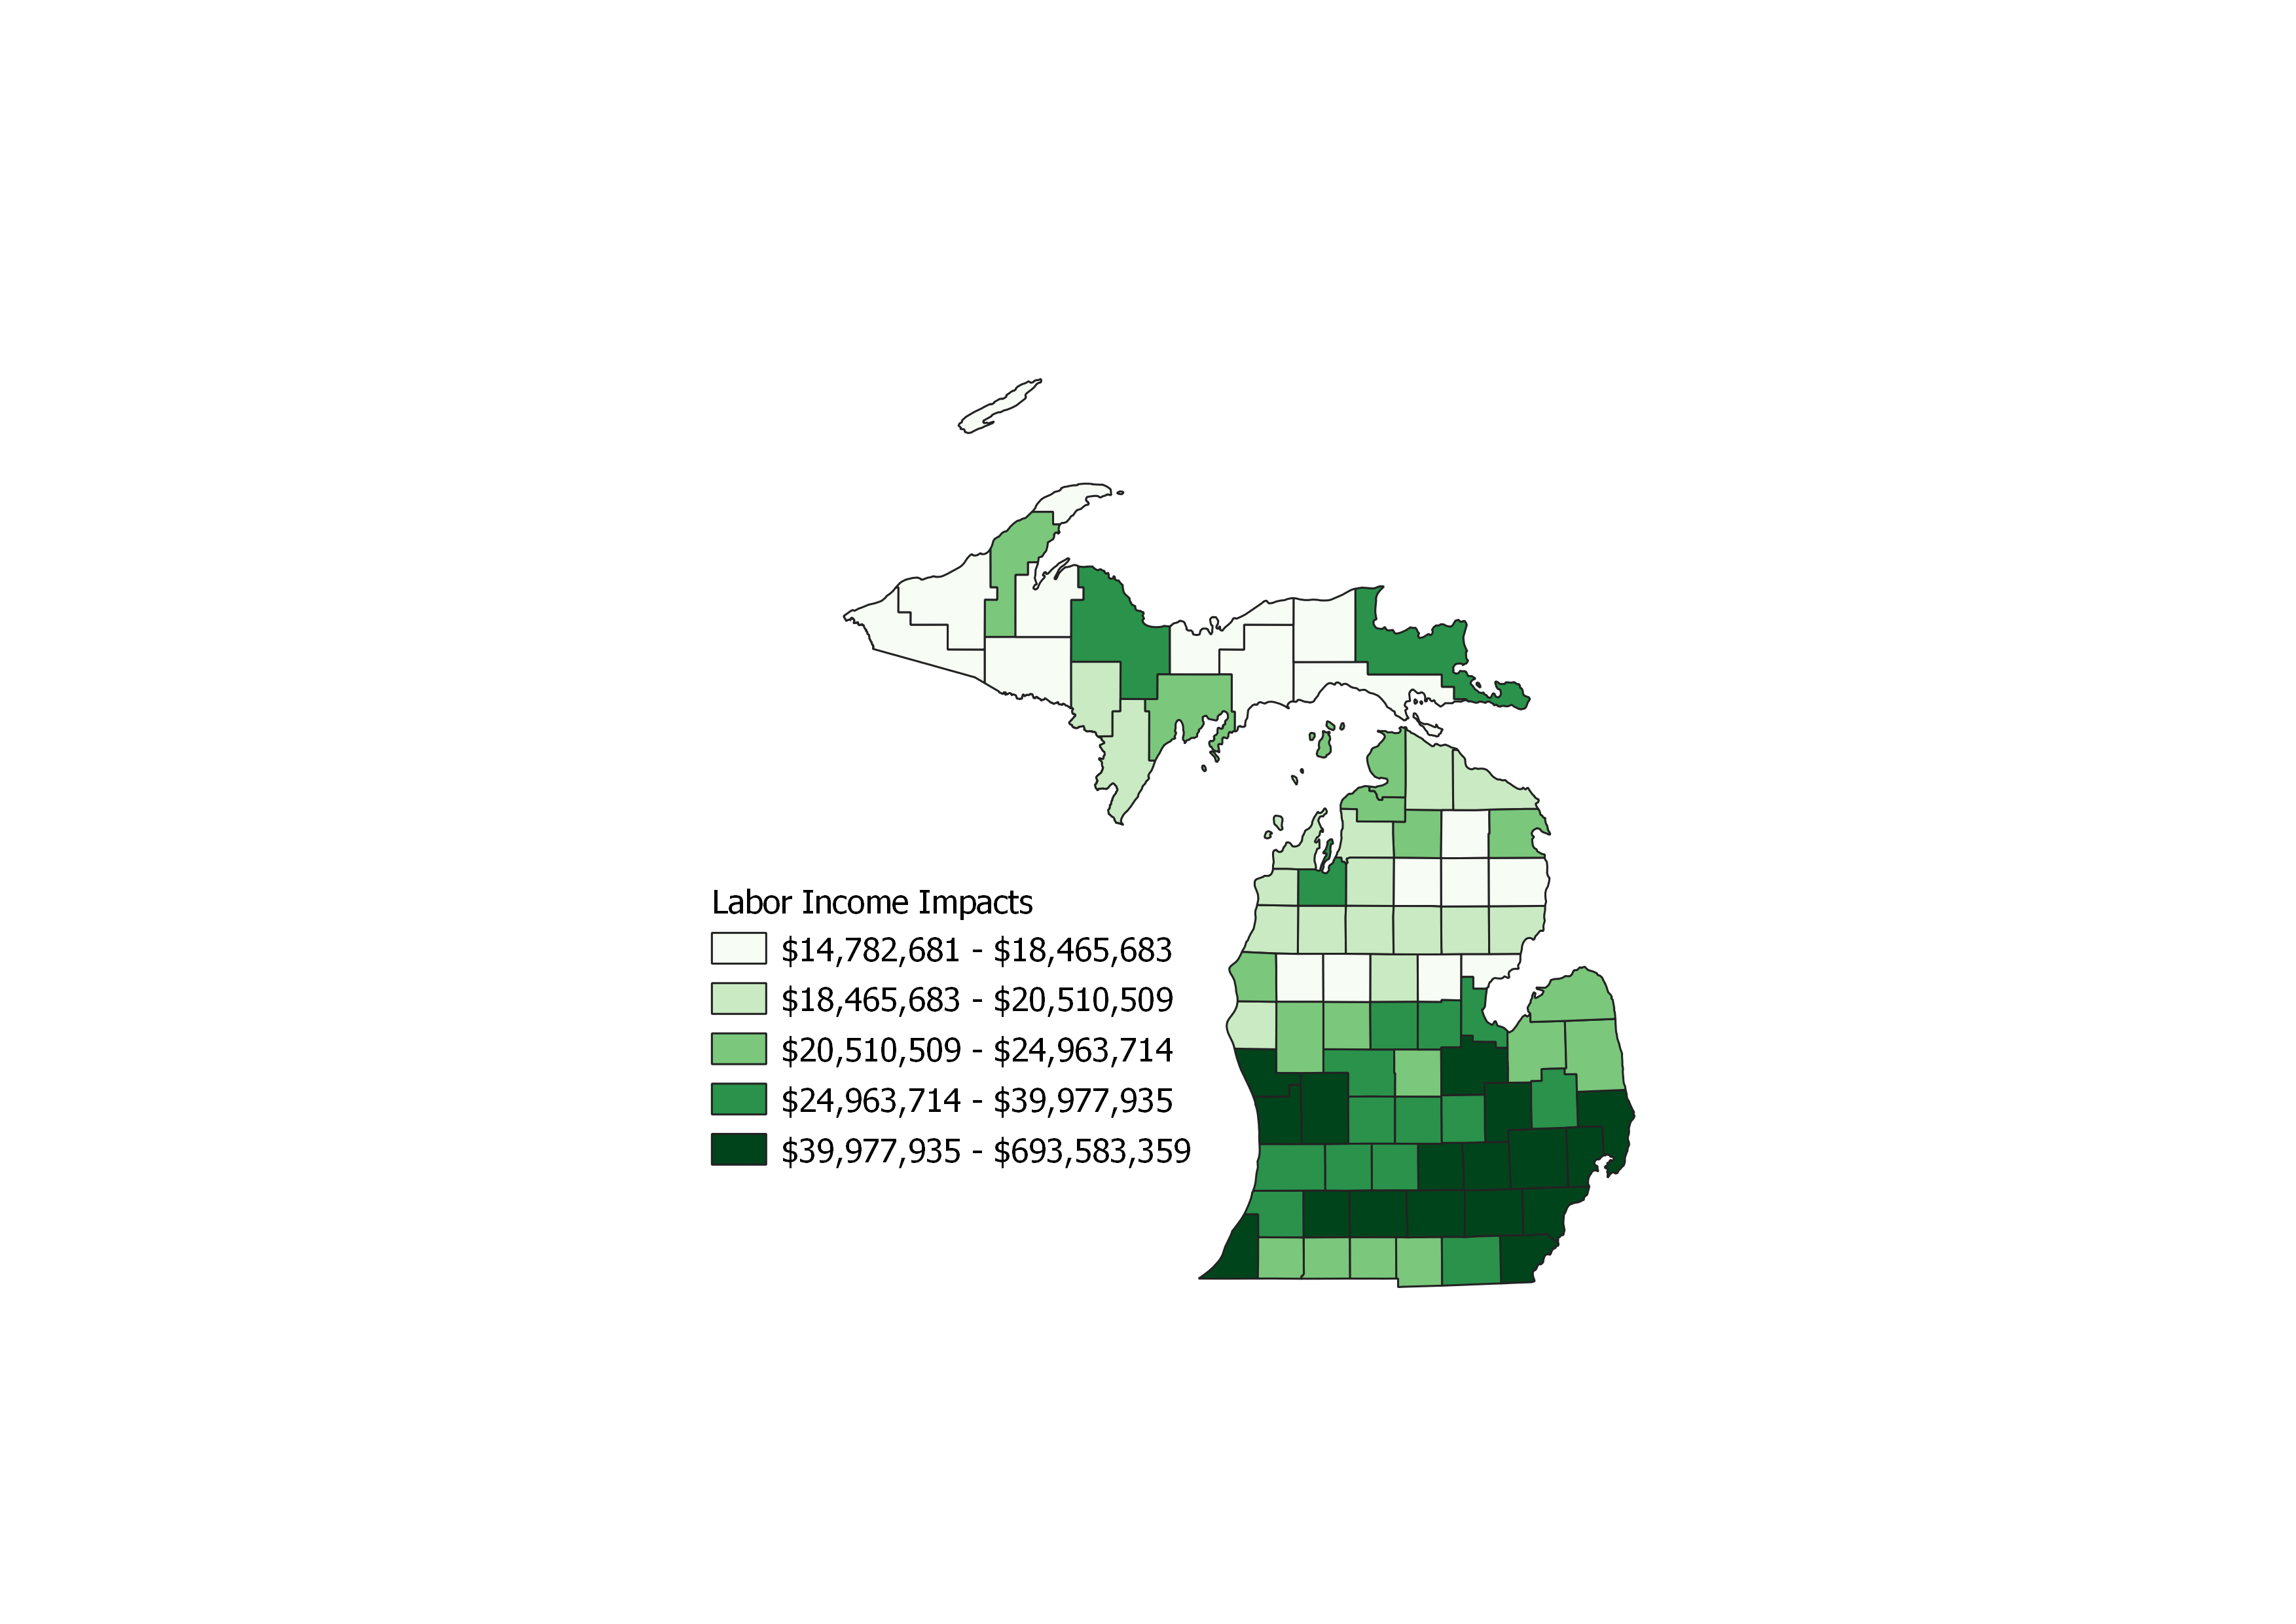 Labor Income Impact by County